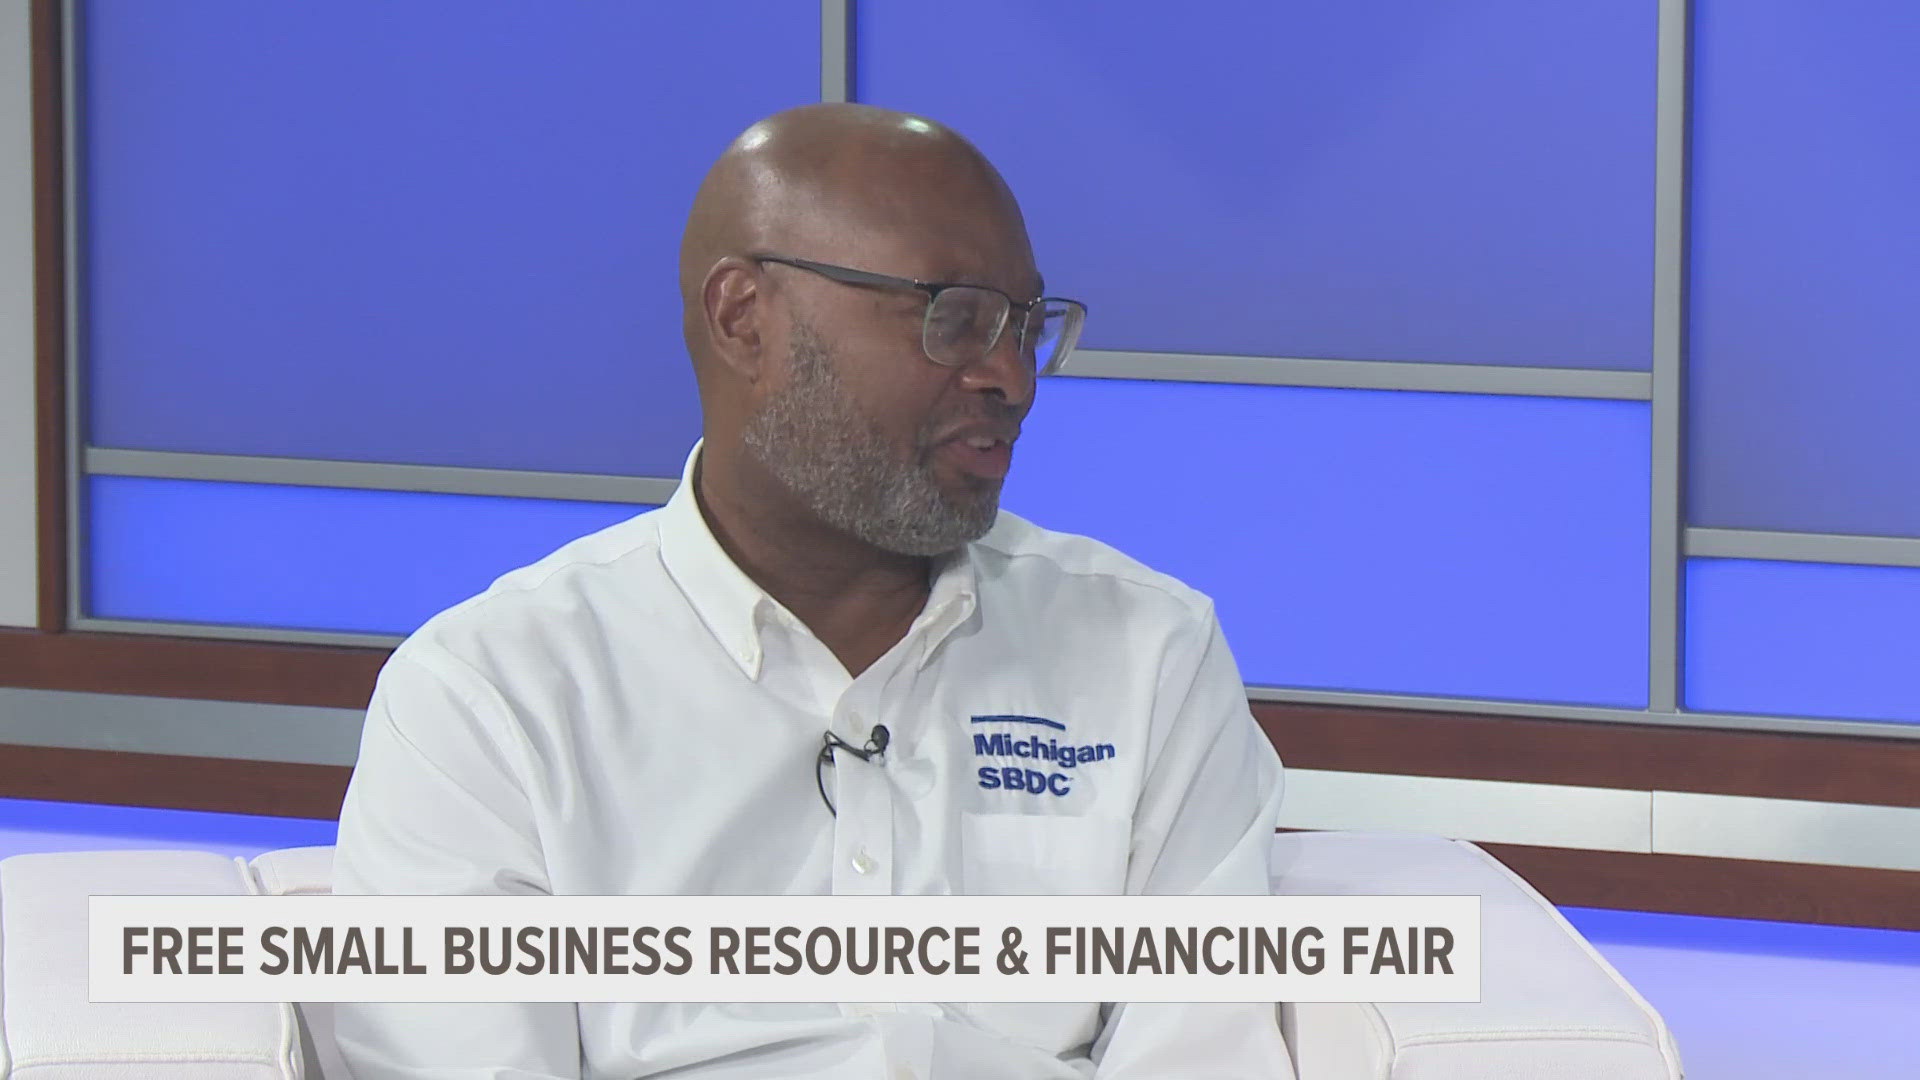 This week is Small Business Week, and one local organization is celebrating with a resource and financing fair.